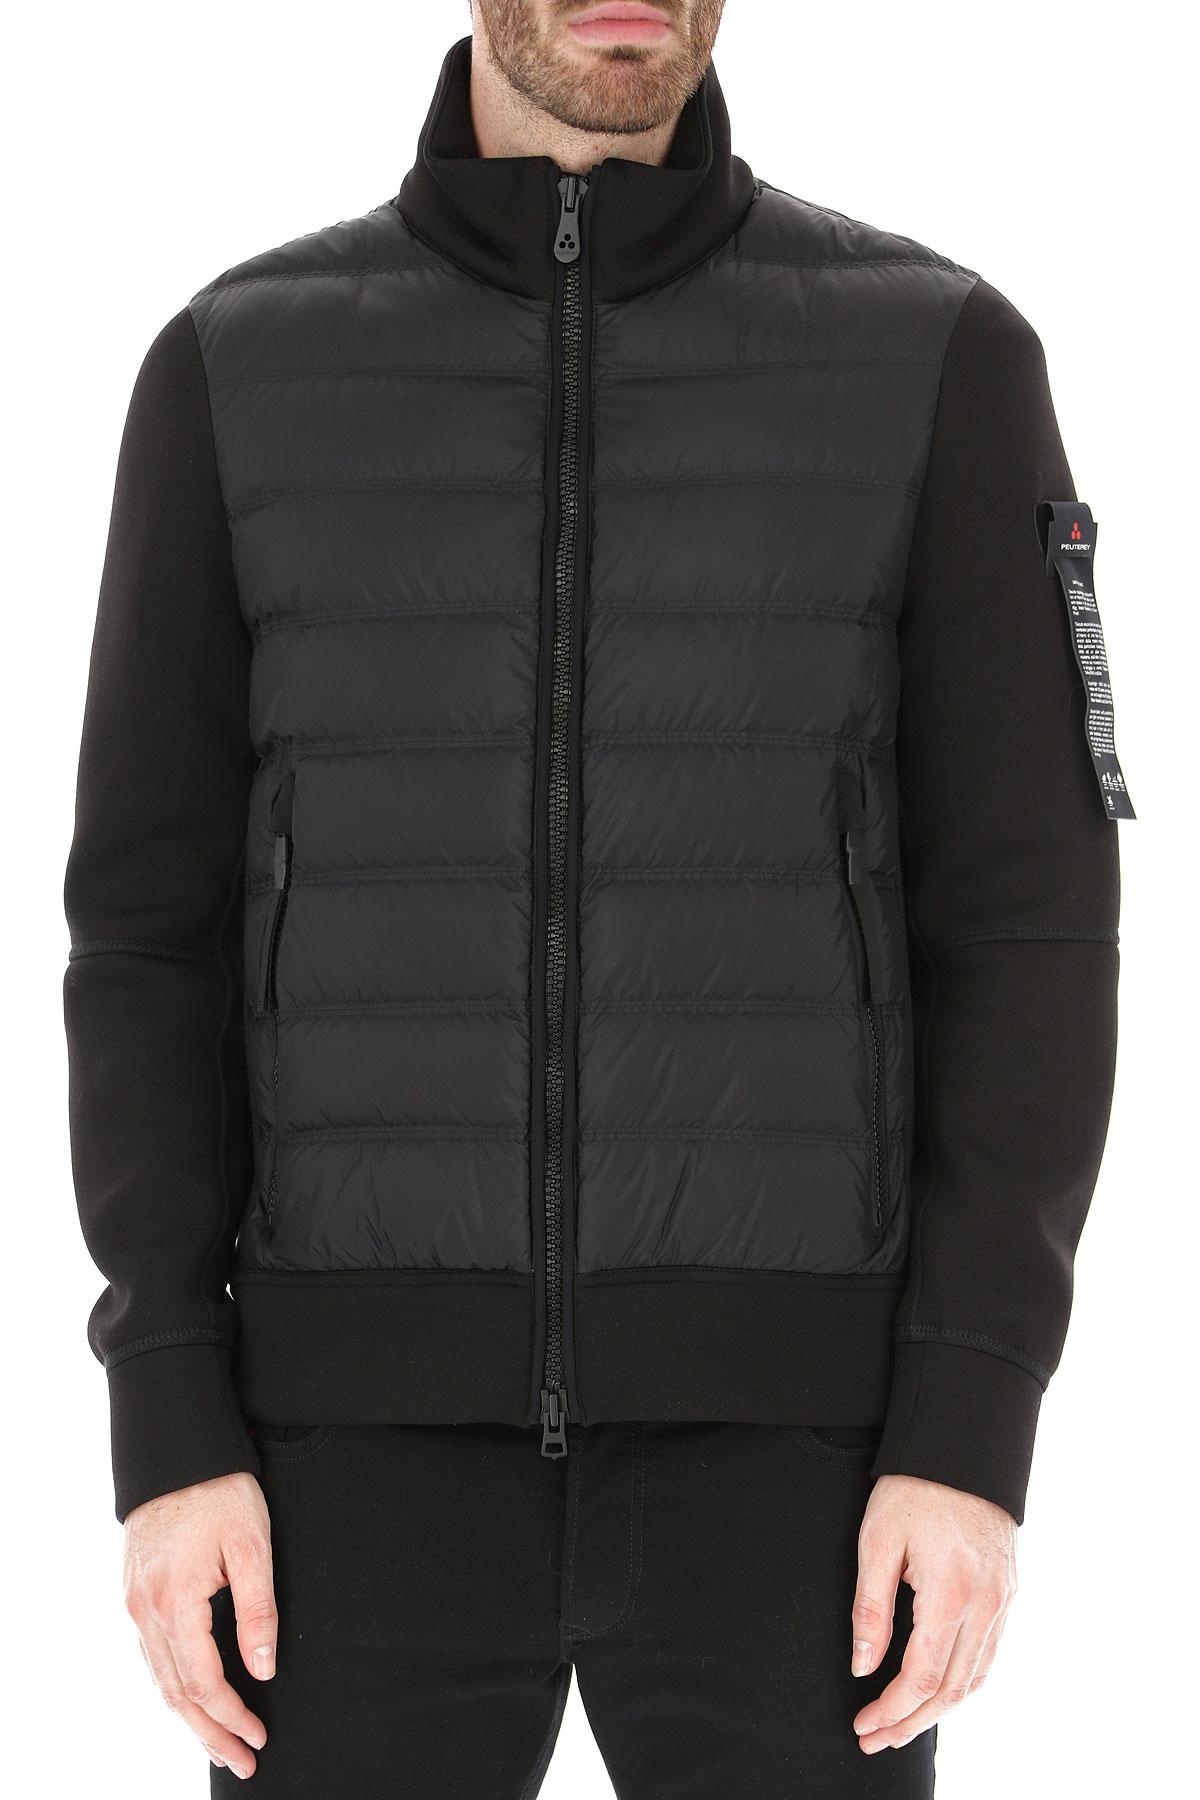 Peuterey Synthetic Down Jacket For Men in Black for Men - Lyst